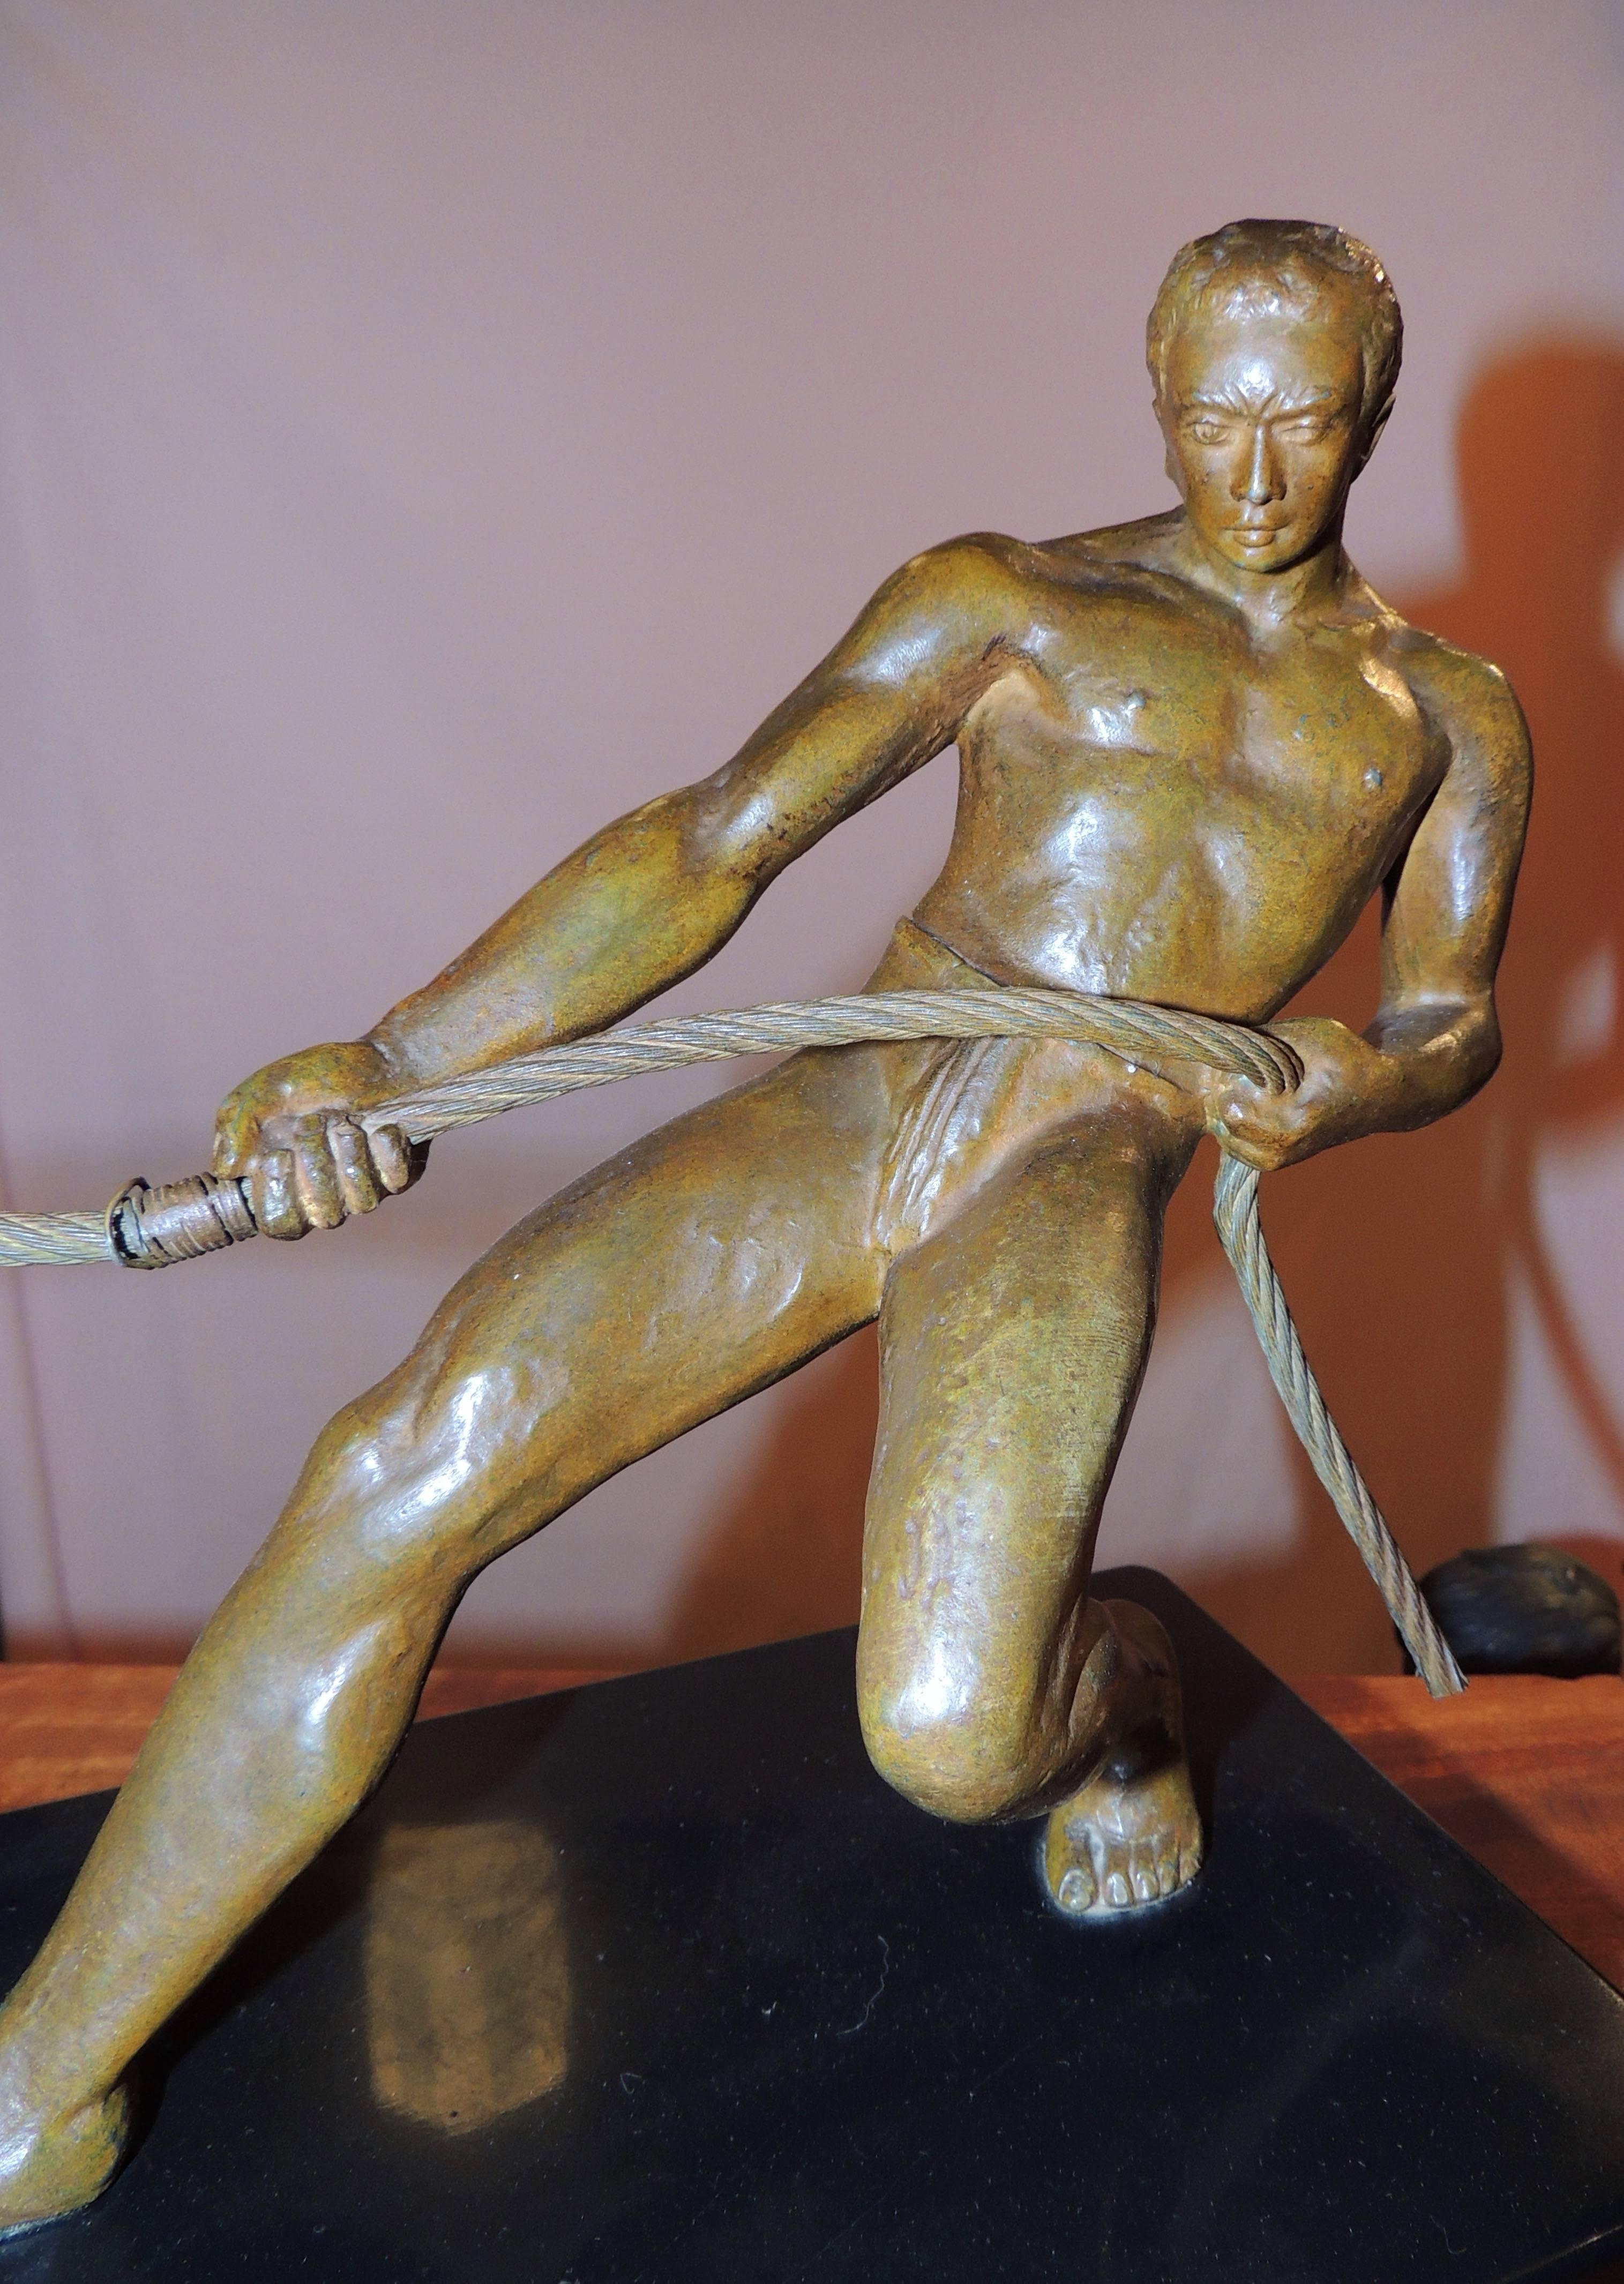 An Art Deco bronze sculpture of a man gripping a rope and pulling a rowboat ashore. It is a strong and unusual image, in contrast to the many images of men throwing spears or bending steel. This sculpture uses a section of the boat divided by a